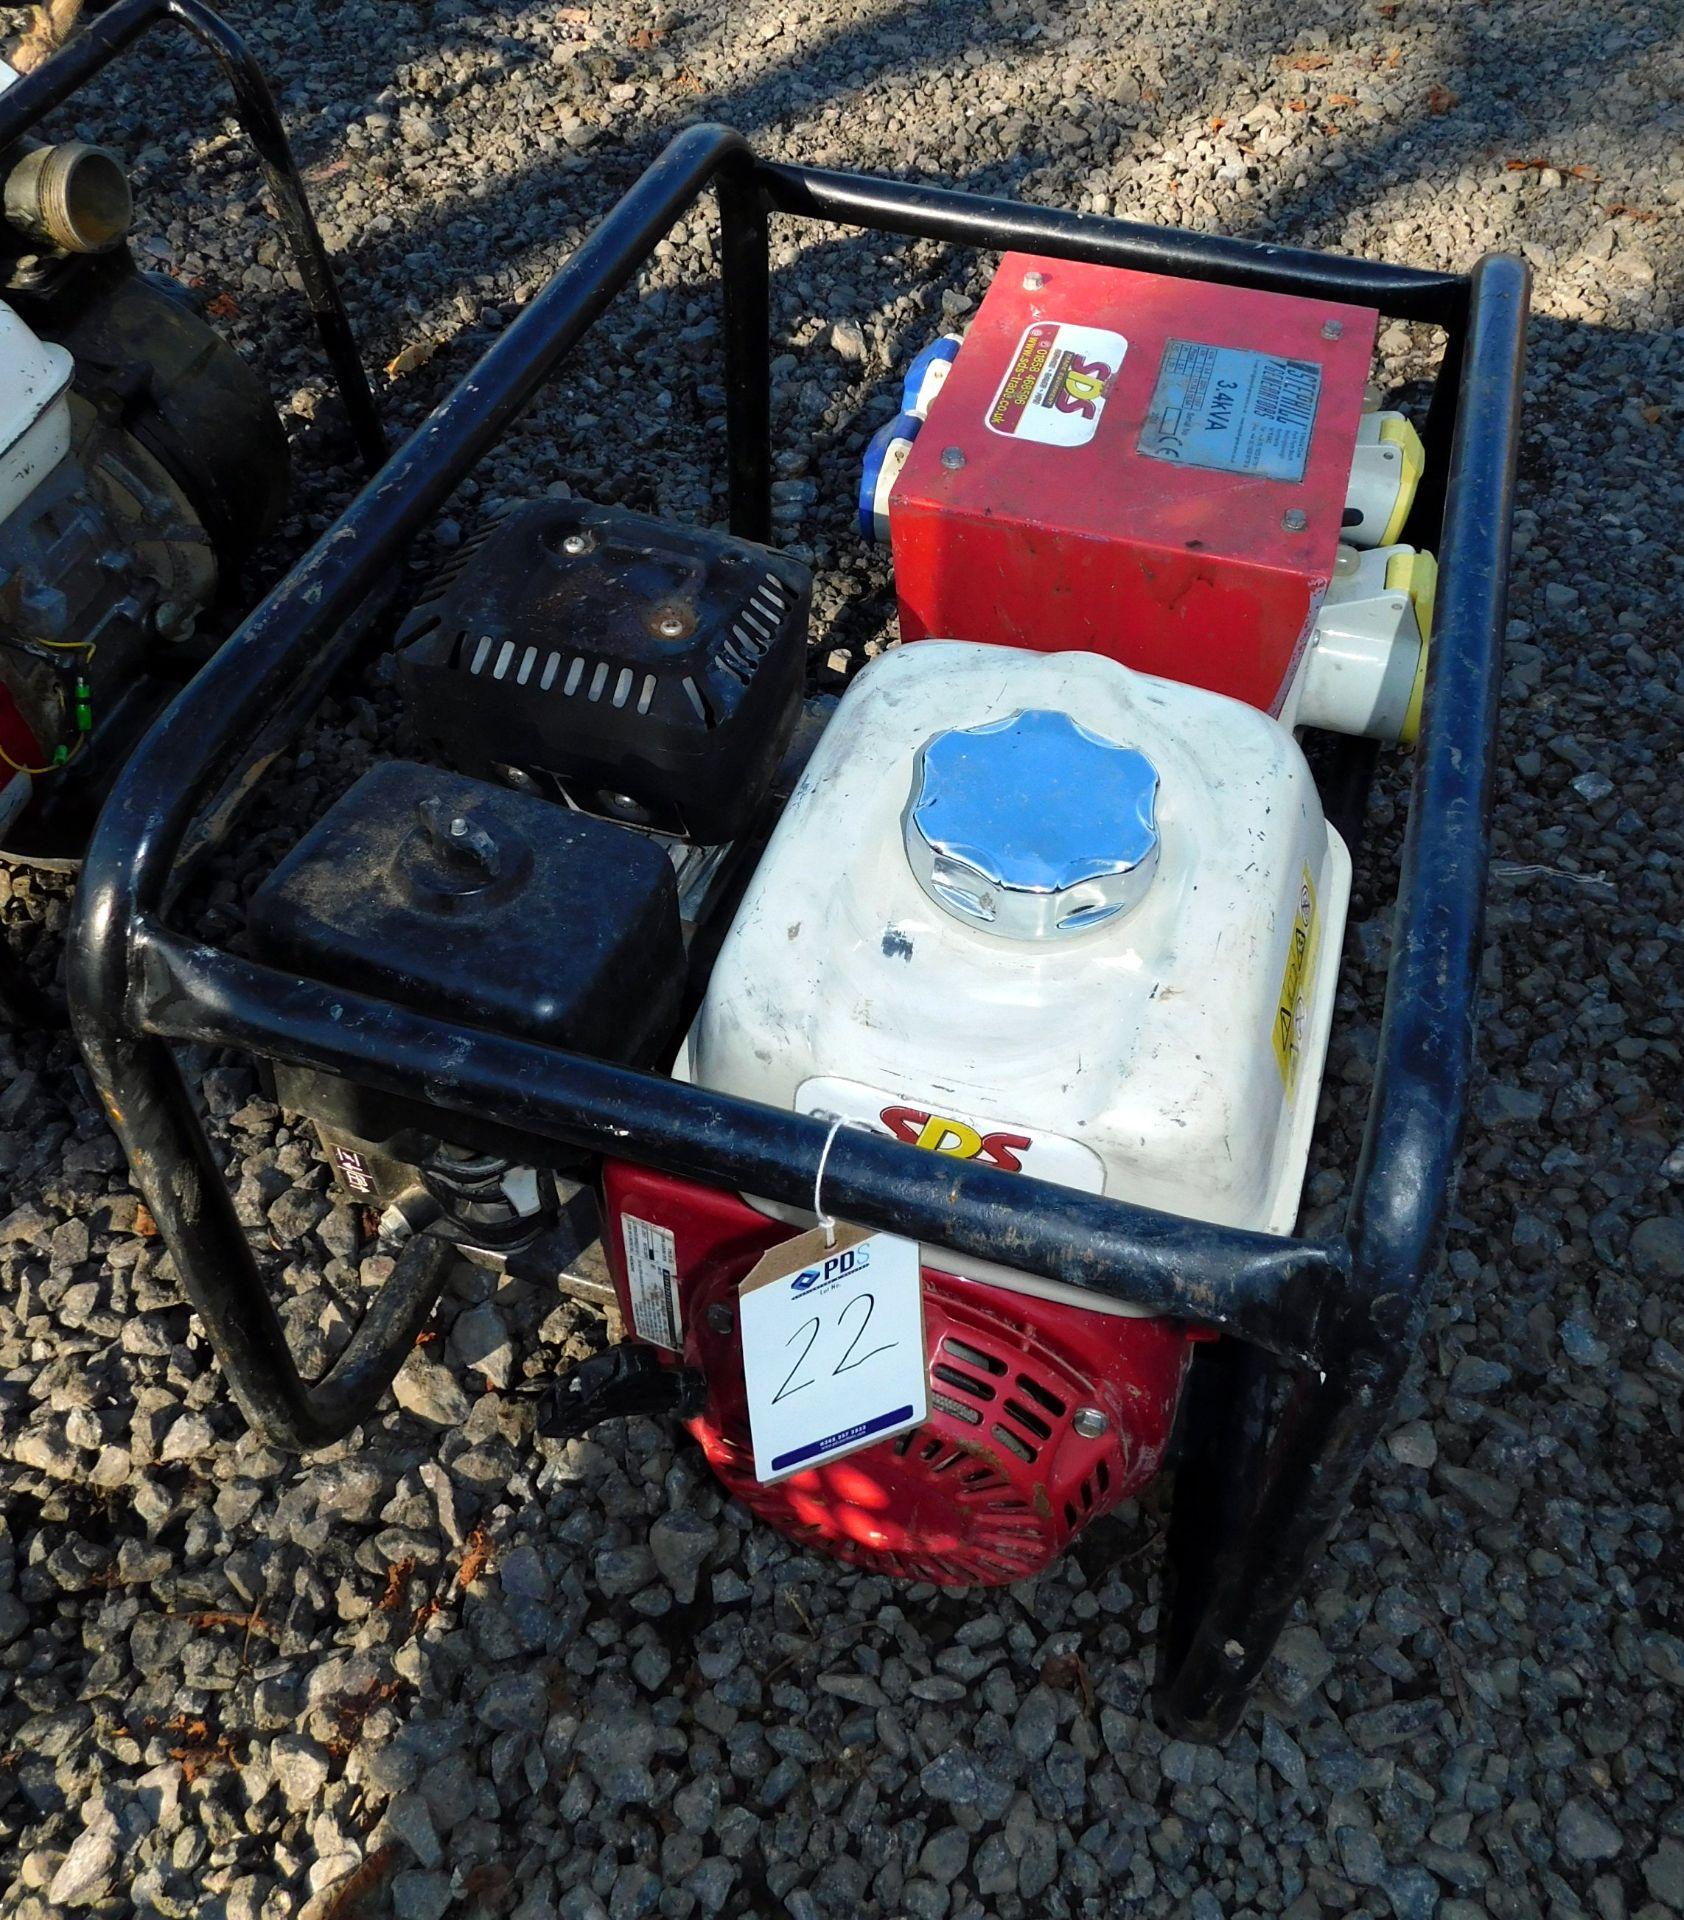 Stephiill 3.4KvA Generator with Honda Engine ()(Located Milton Keynes, Viewing by Appointment –